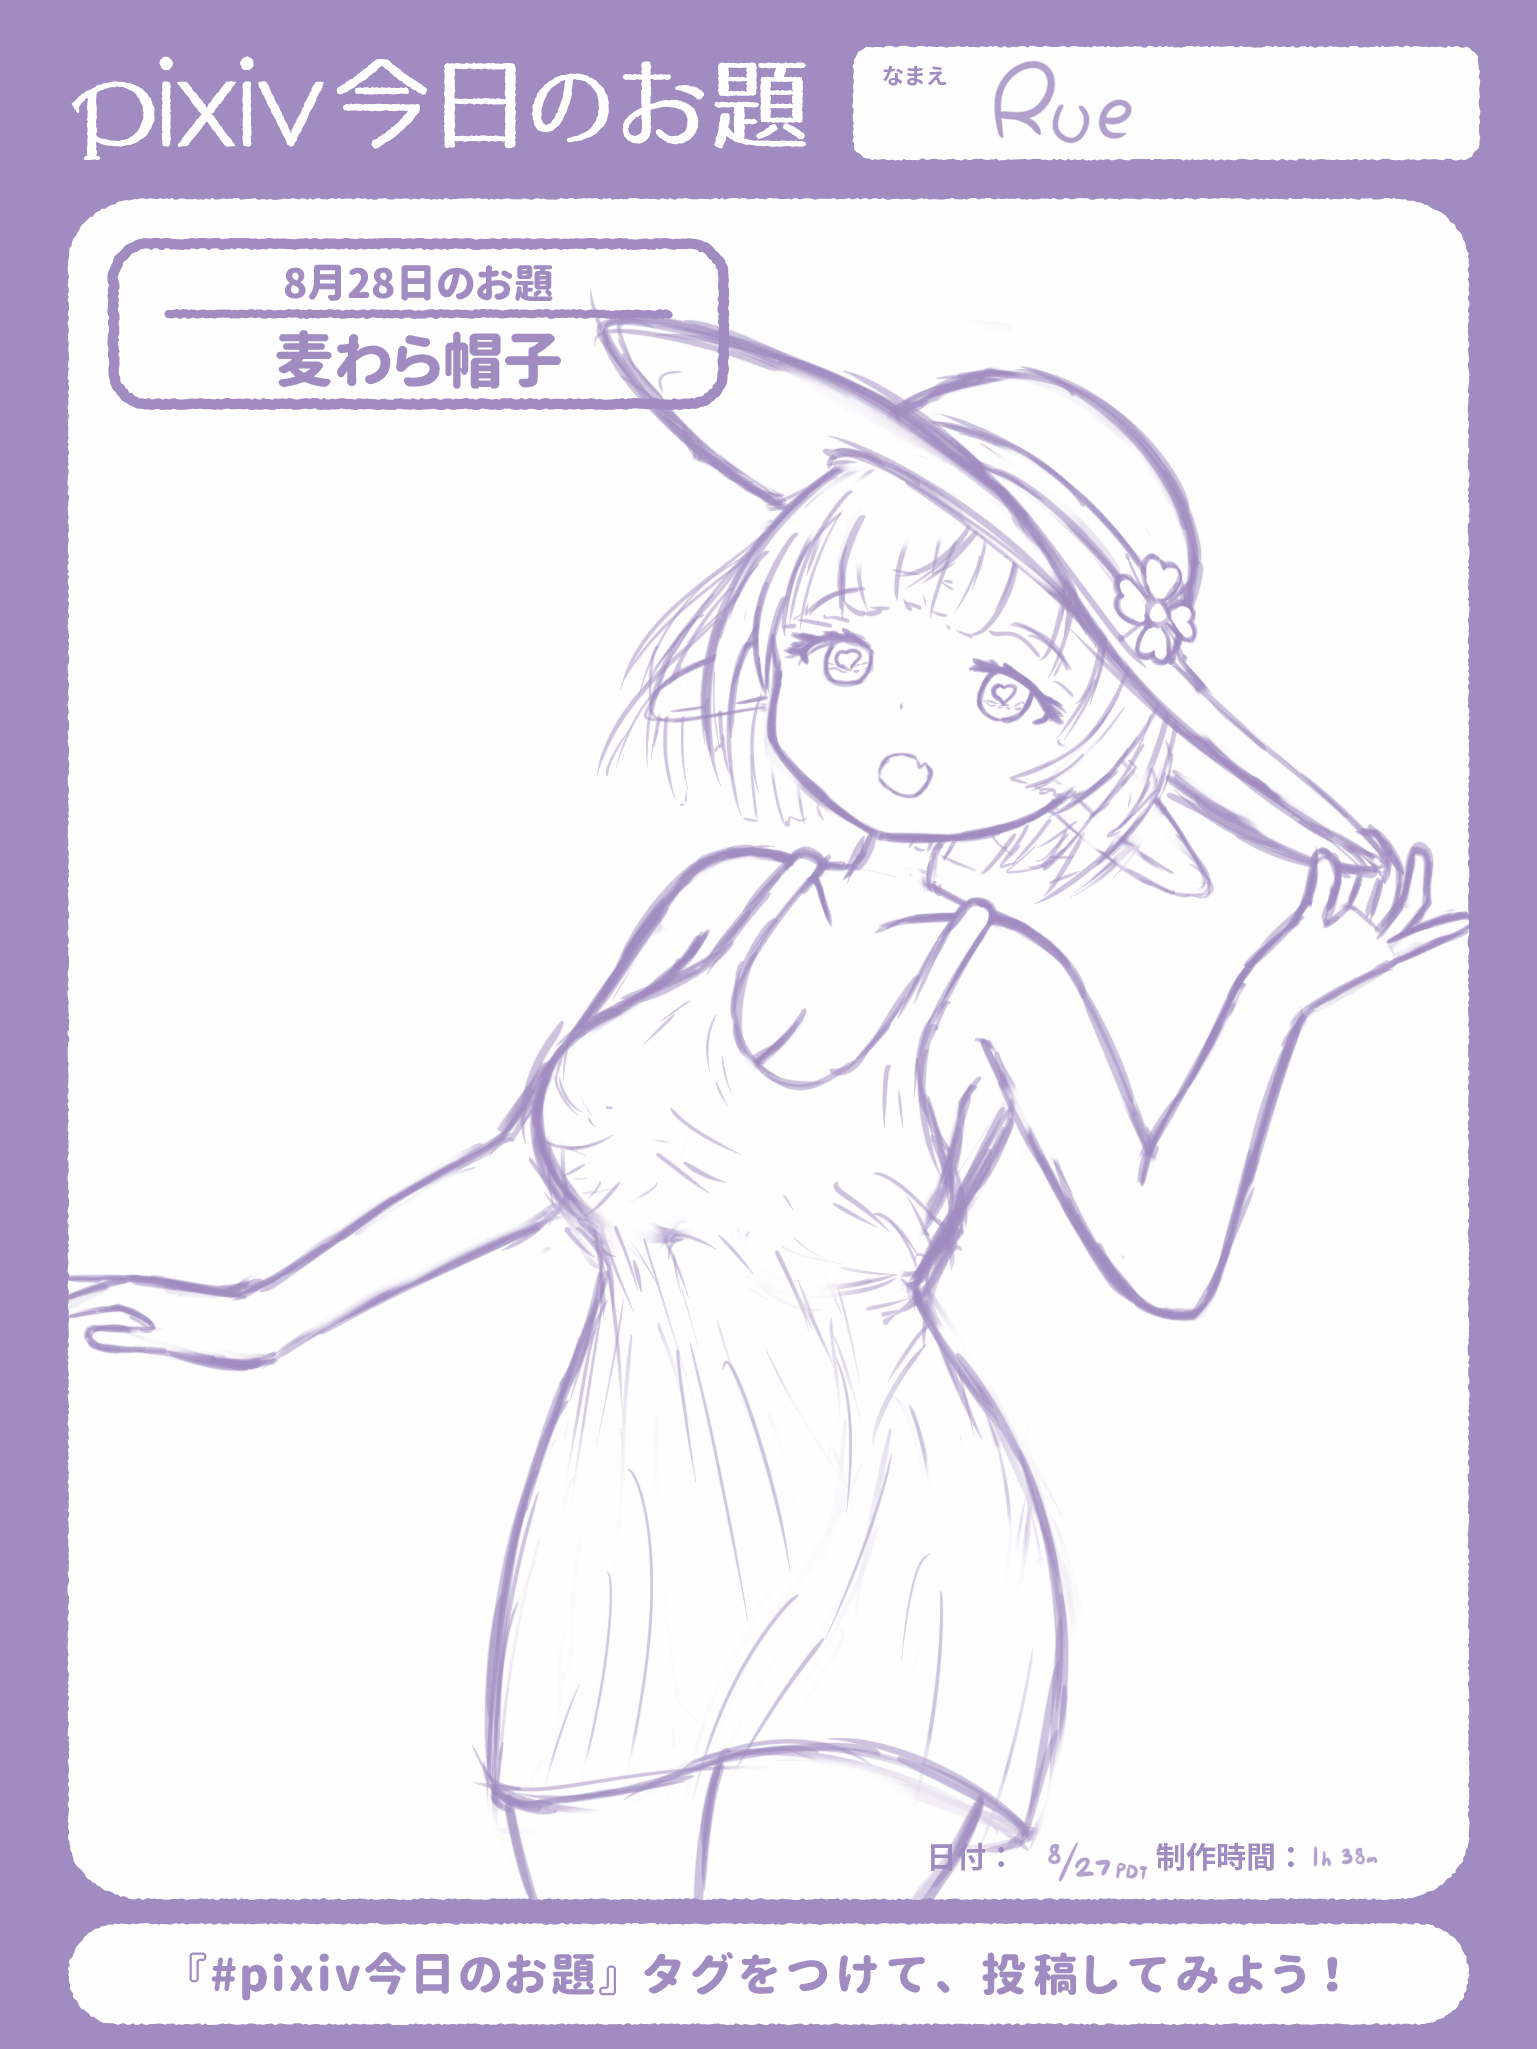 My pixiv今日のお題-sensei sketch of today’s #麦わら帽子 theme! It’s me in a straw hat! I’m holding it on one side! And I’m wearing a dress! I tried to make my hair a little more “flowy” this time but it didn’t really work out.